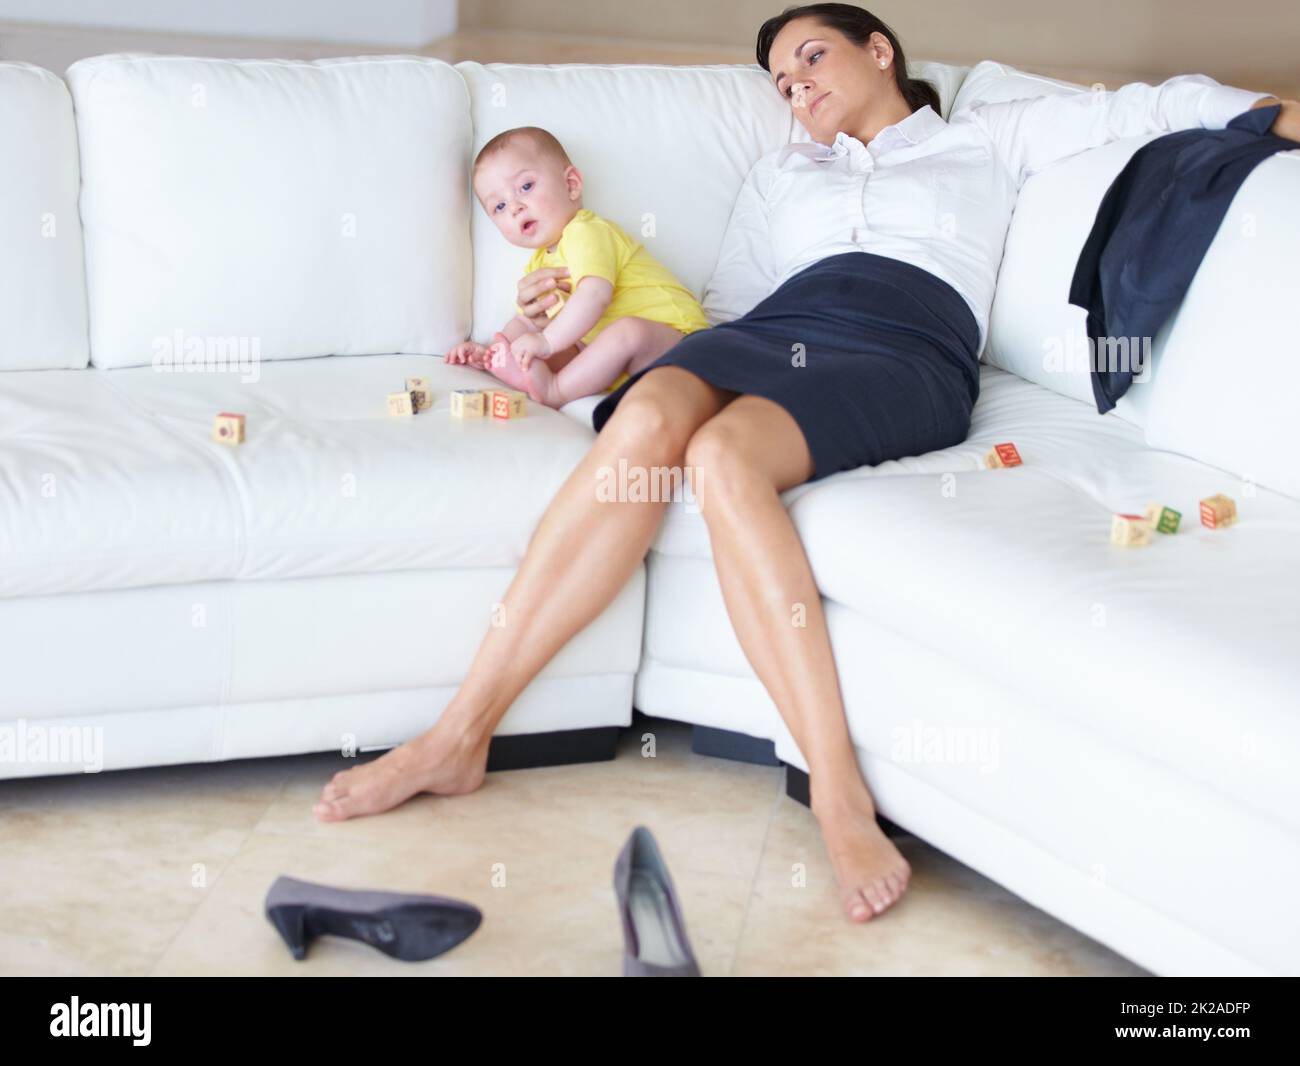 Its tough being a working mom. Exhausted young working mother asleep on the couch next to her baby. Stock Photo